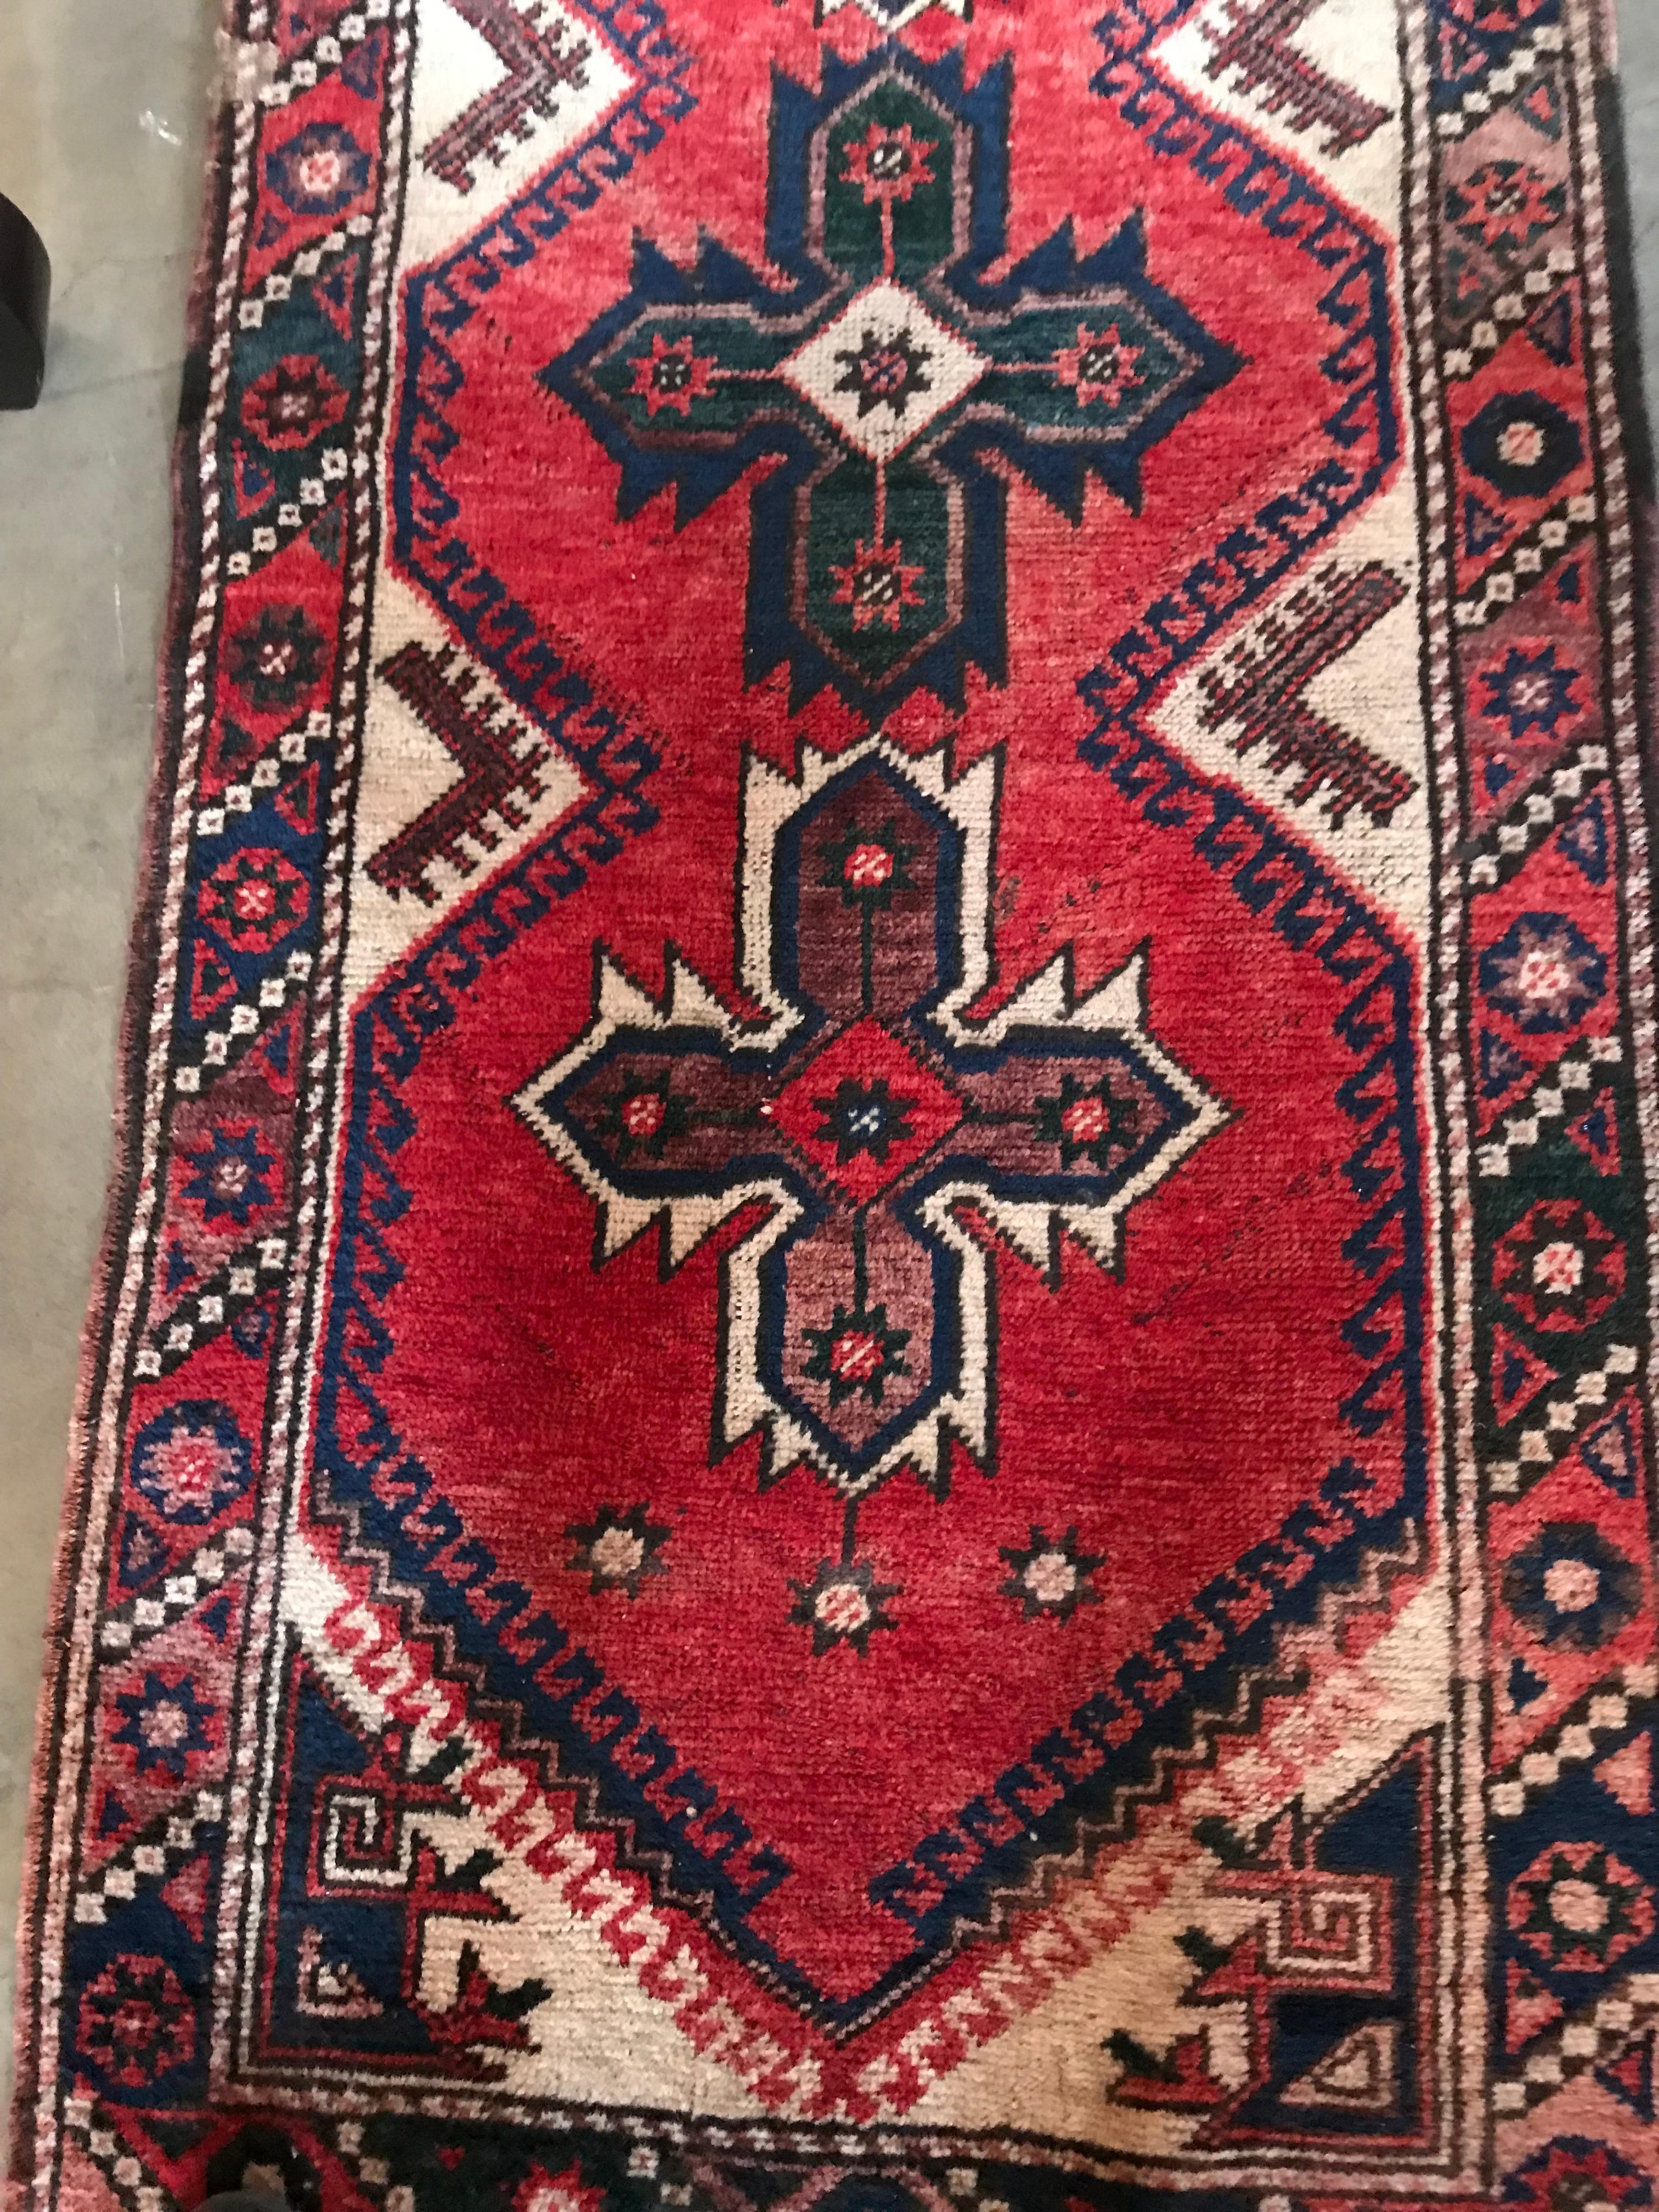 This textured Kilim runner stands out in deep red color with seven medallion crosses alternating in brown and black as well as repeated patterns of diamonds and triangles along the edges. White fringe outlines both ends.
 